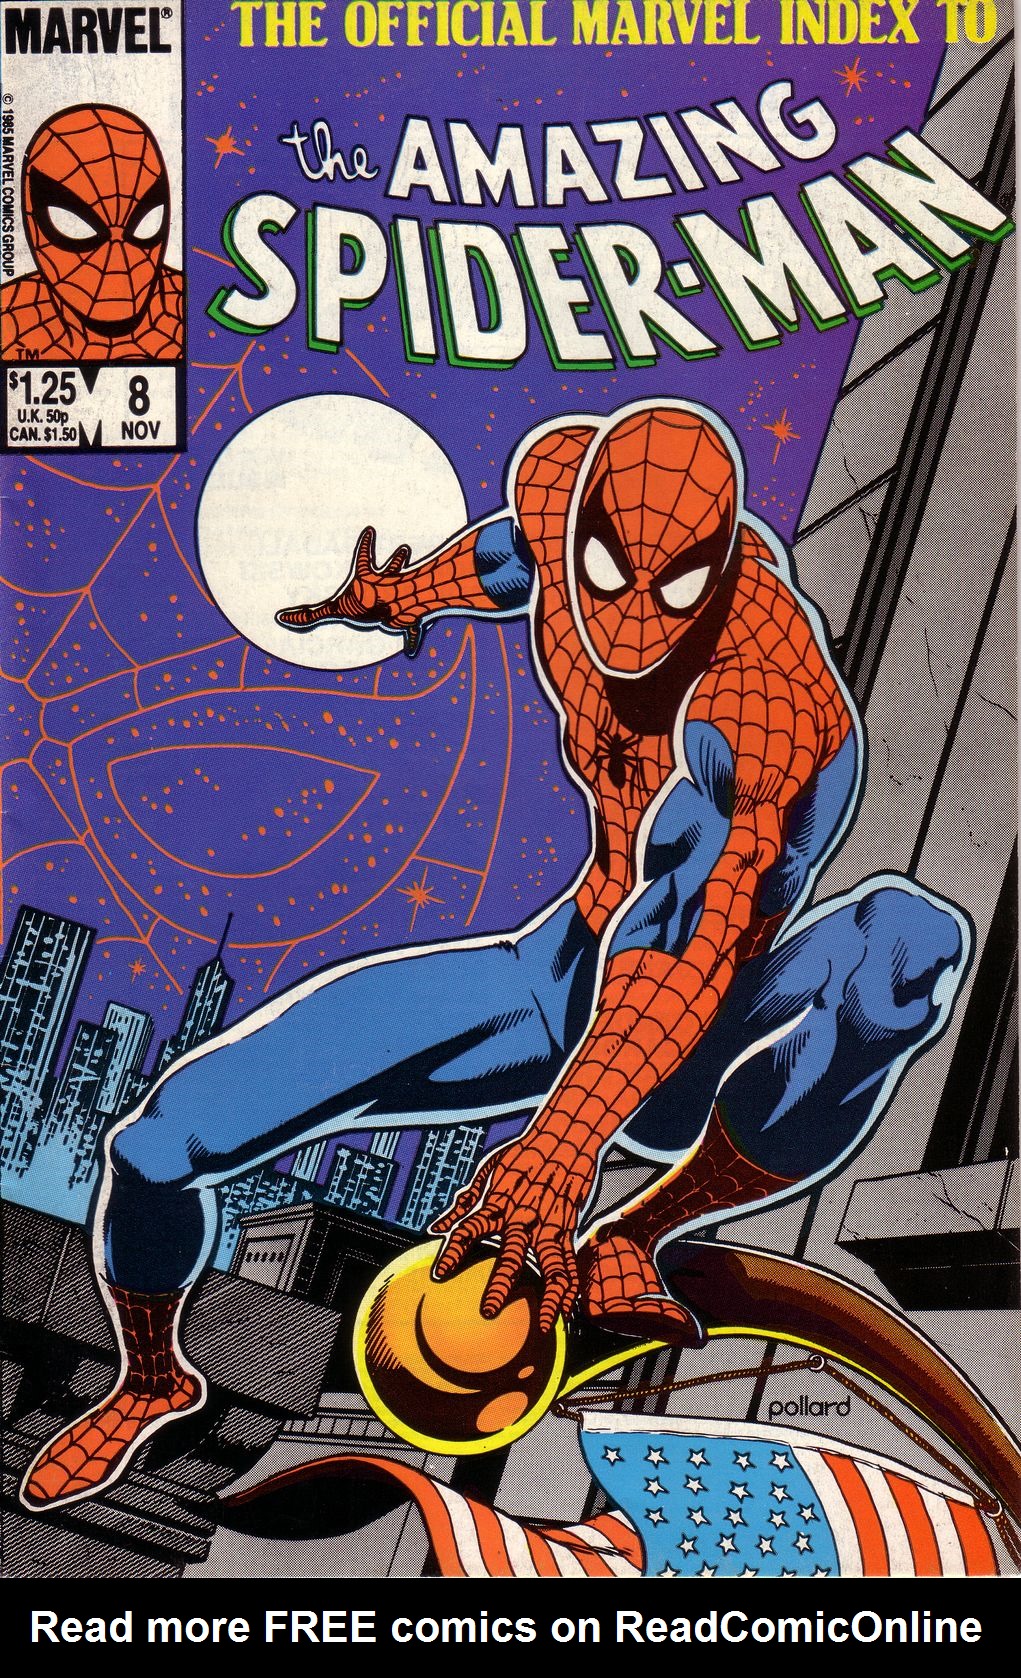 Read online The Official Marvel Index to The Amazing Spider-Man comic -  Issue #8 - 1